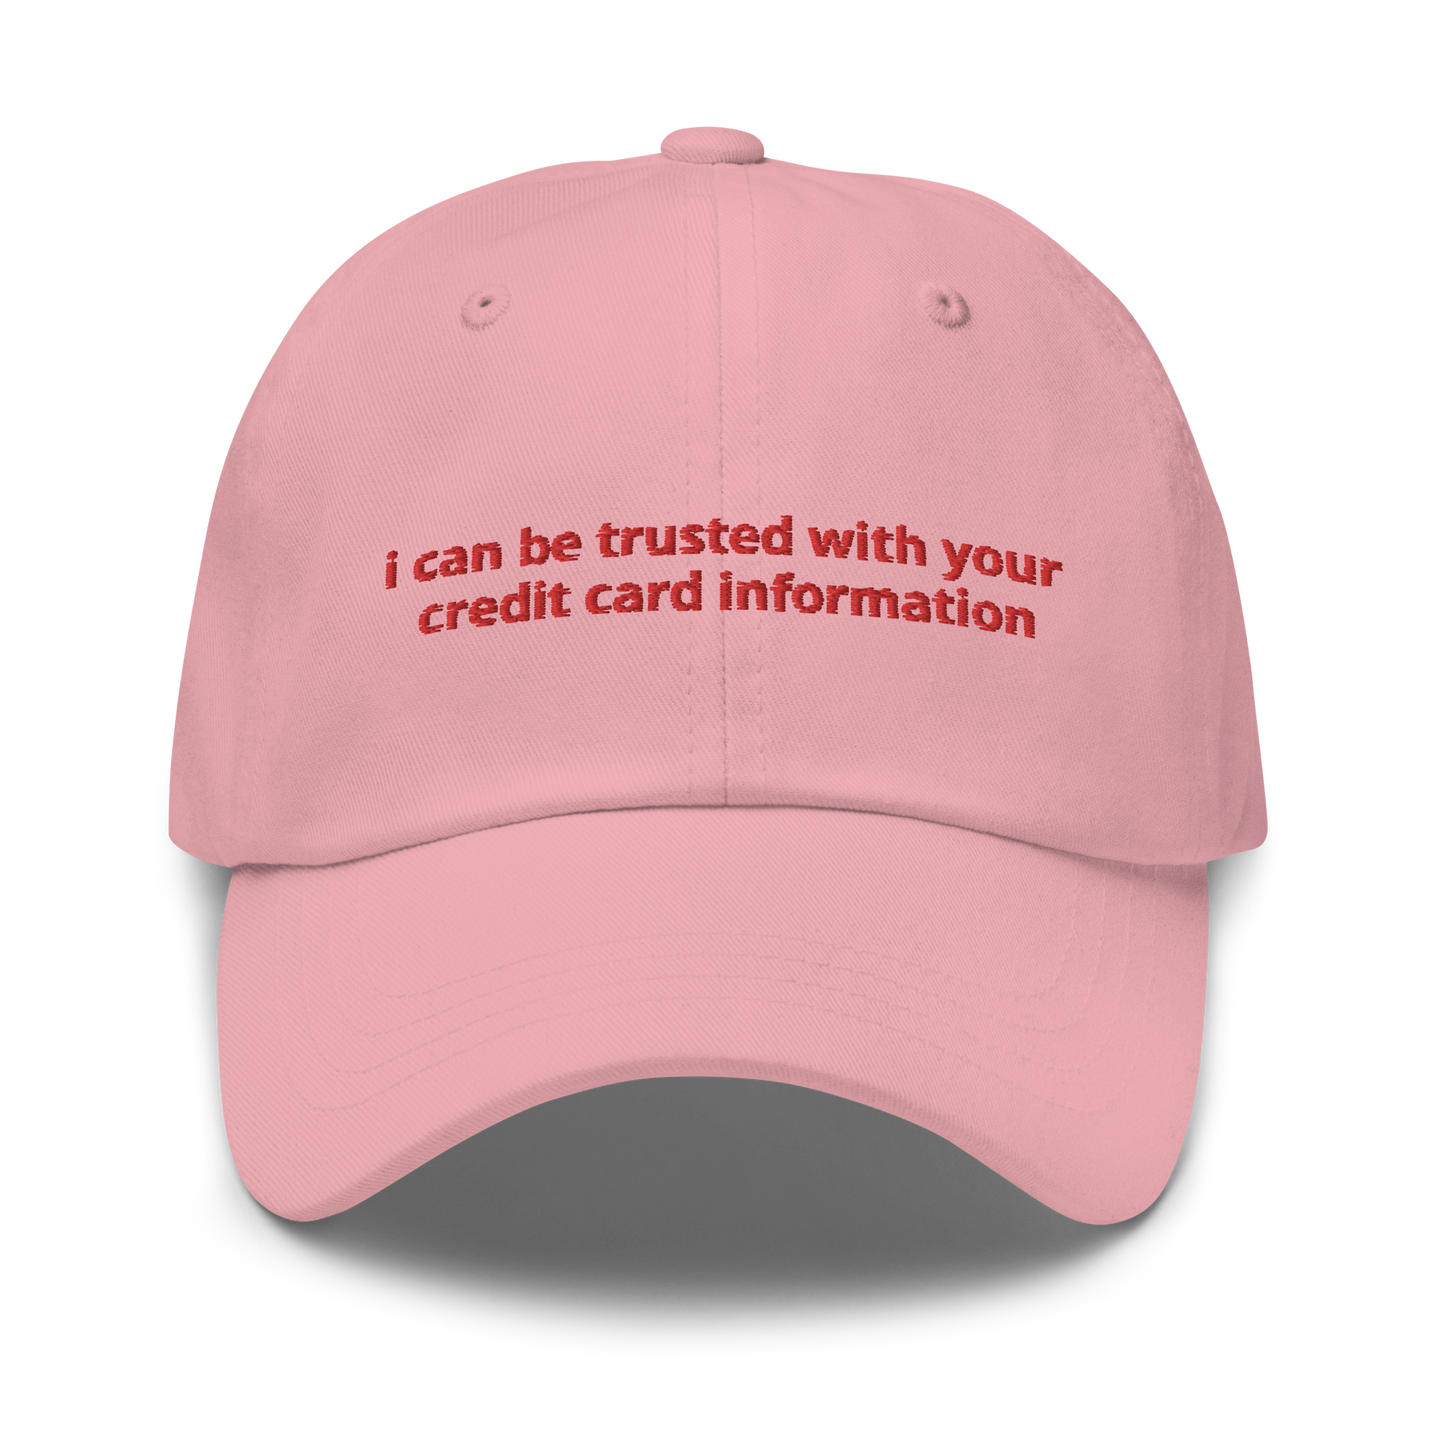 i can be trusted with your credit card information cap